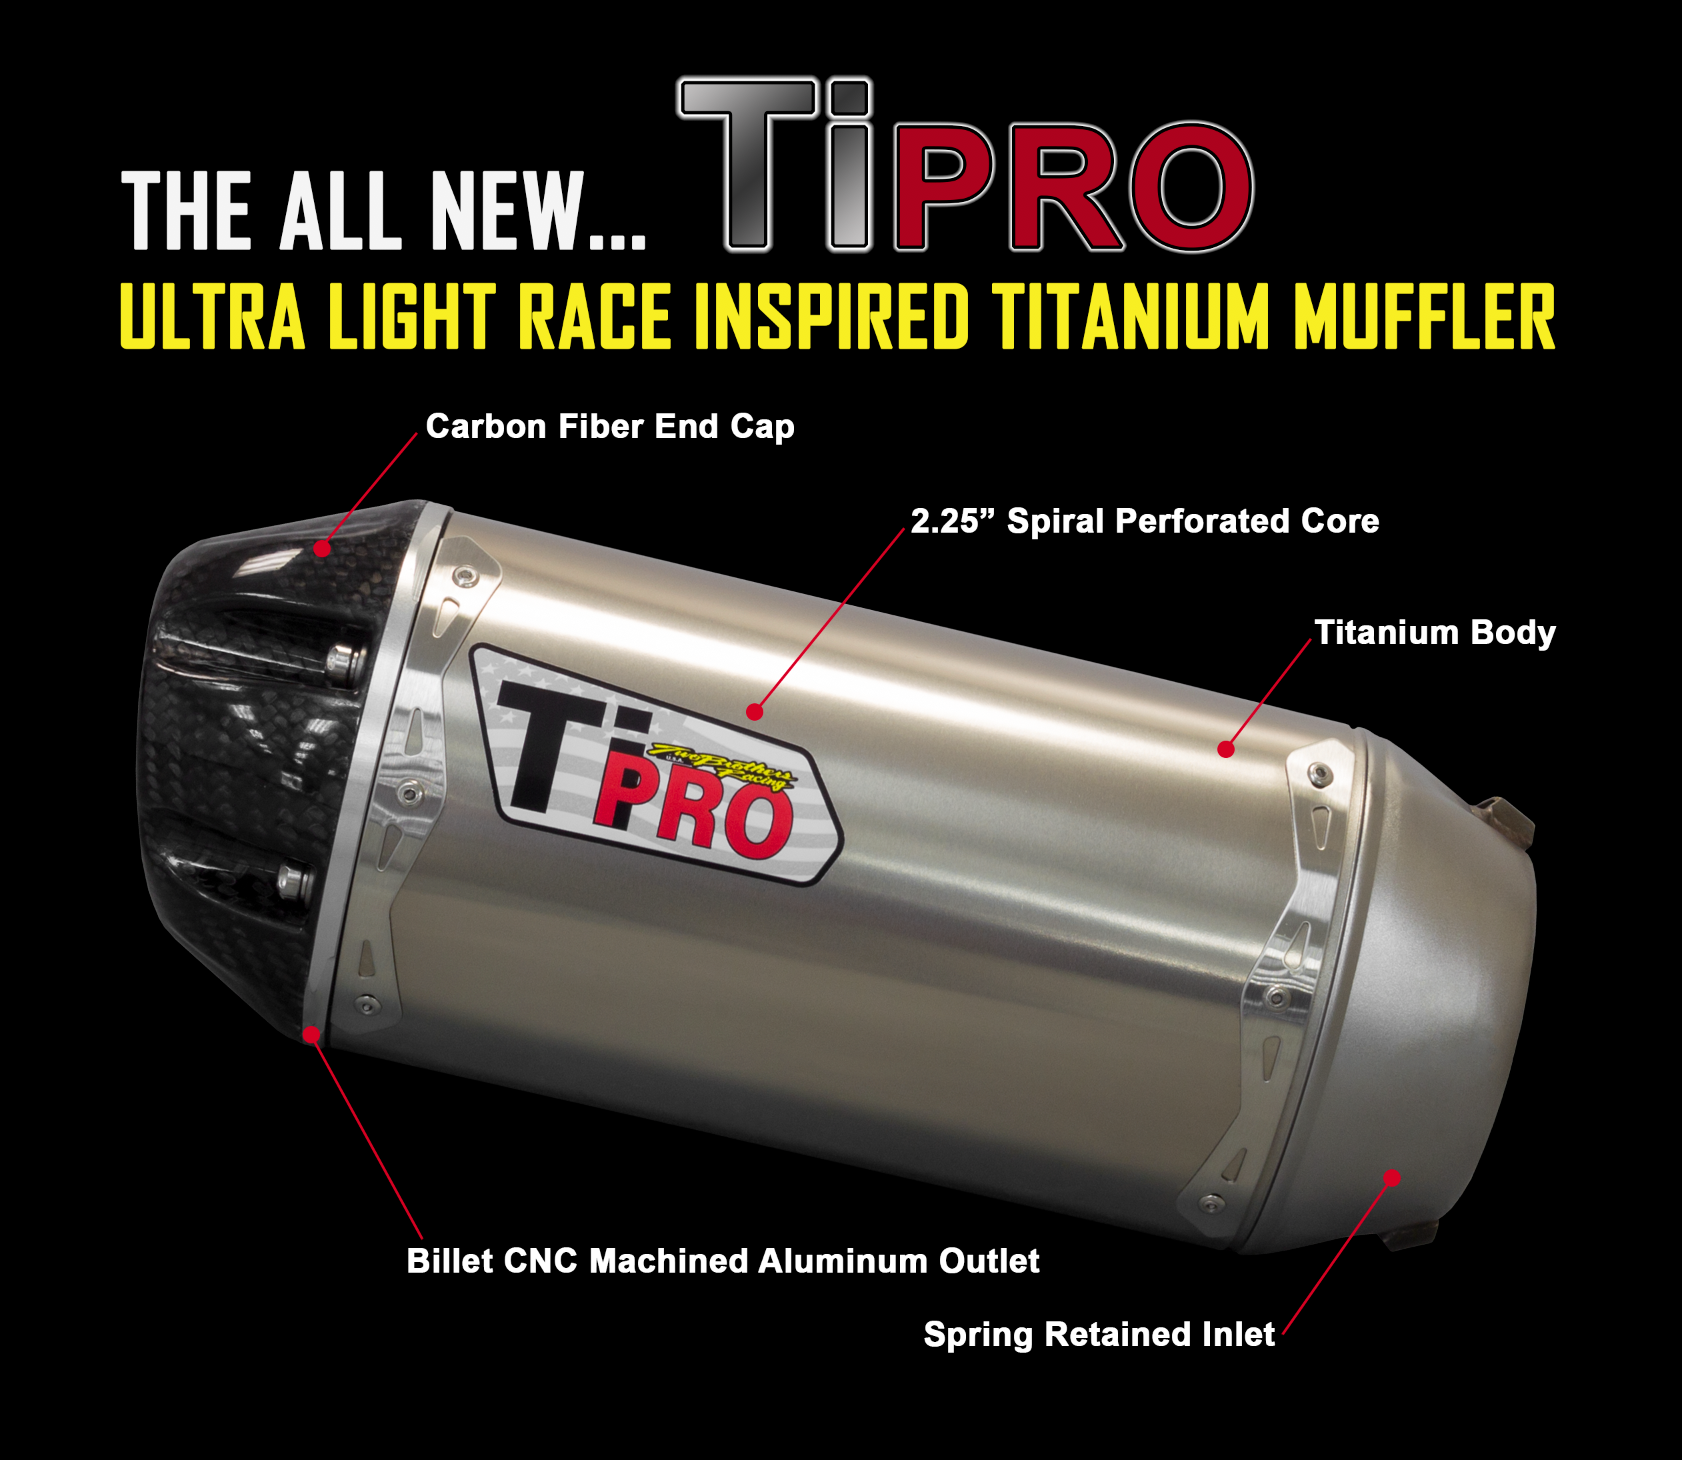 Two Brothers Racing has a Ultra Light Race Inspired Titanium Muffler